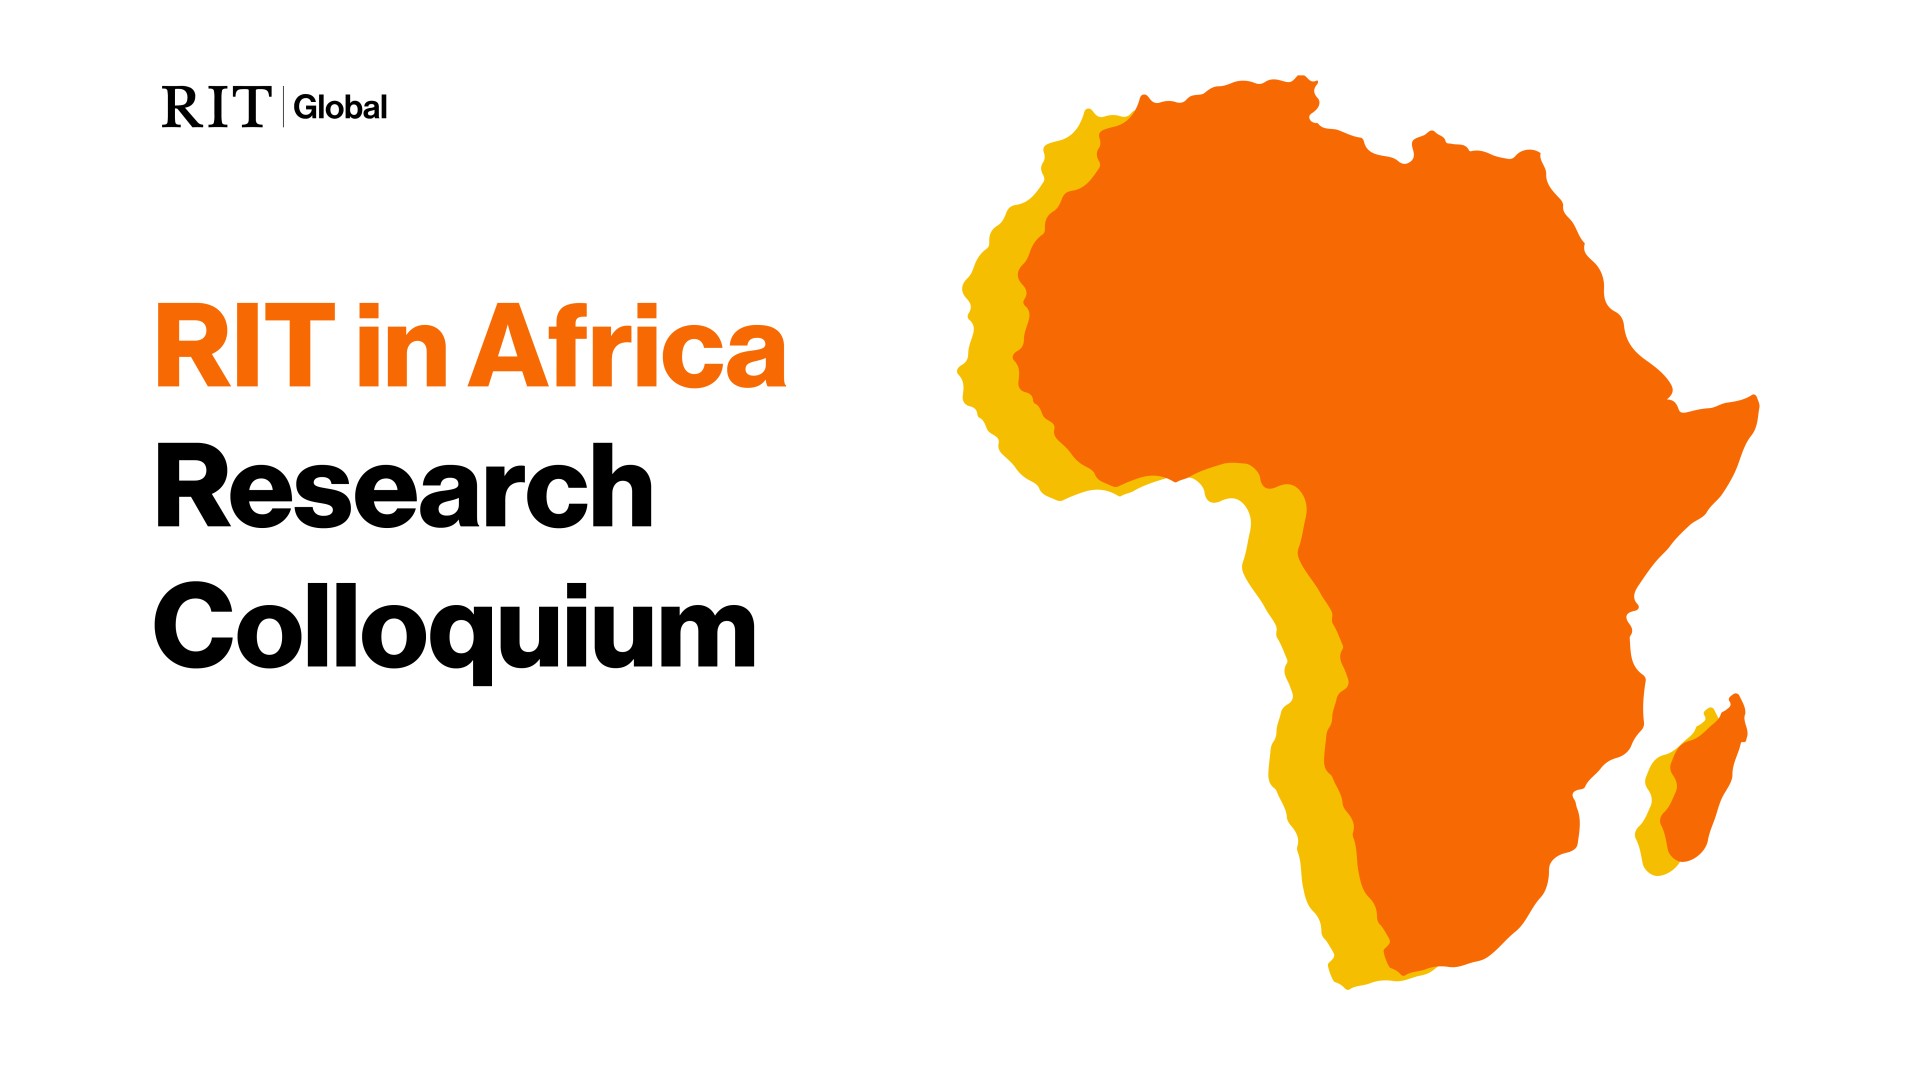 Title of colloquium on the right and map of Africa on the left